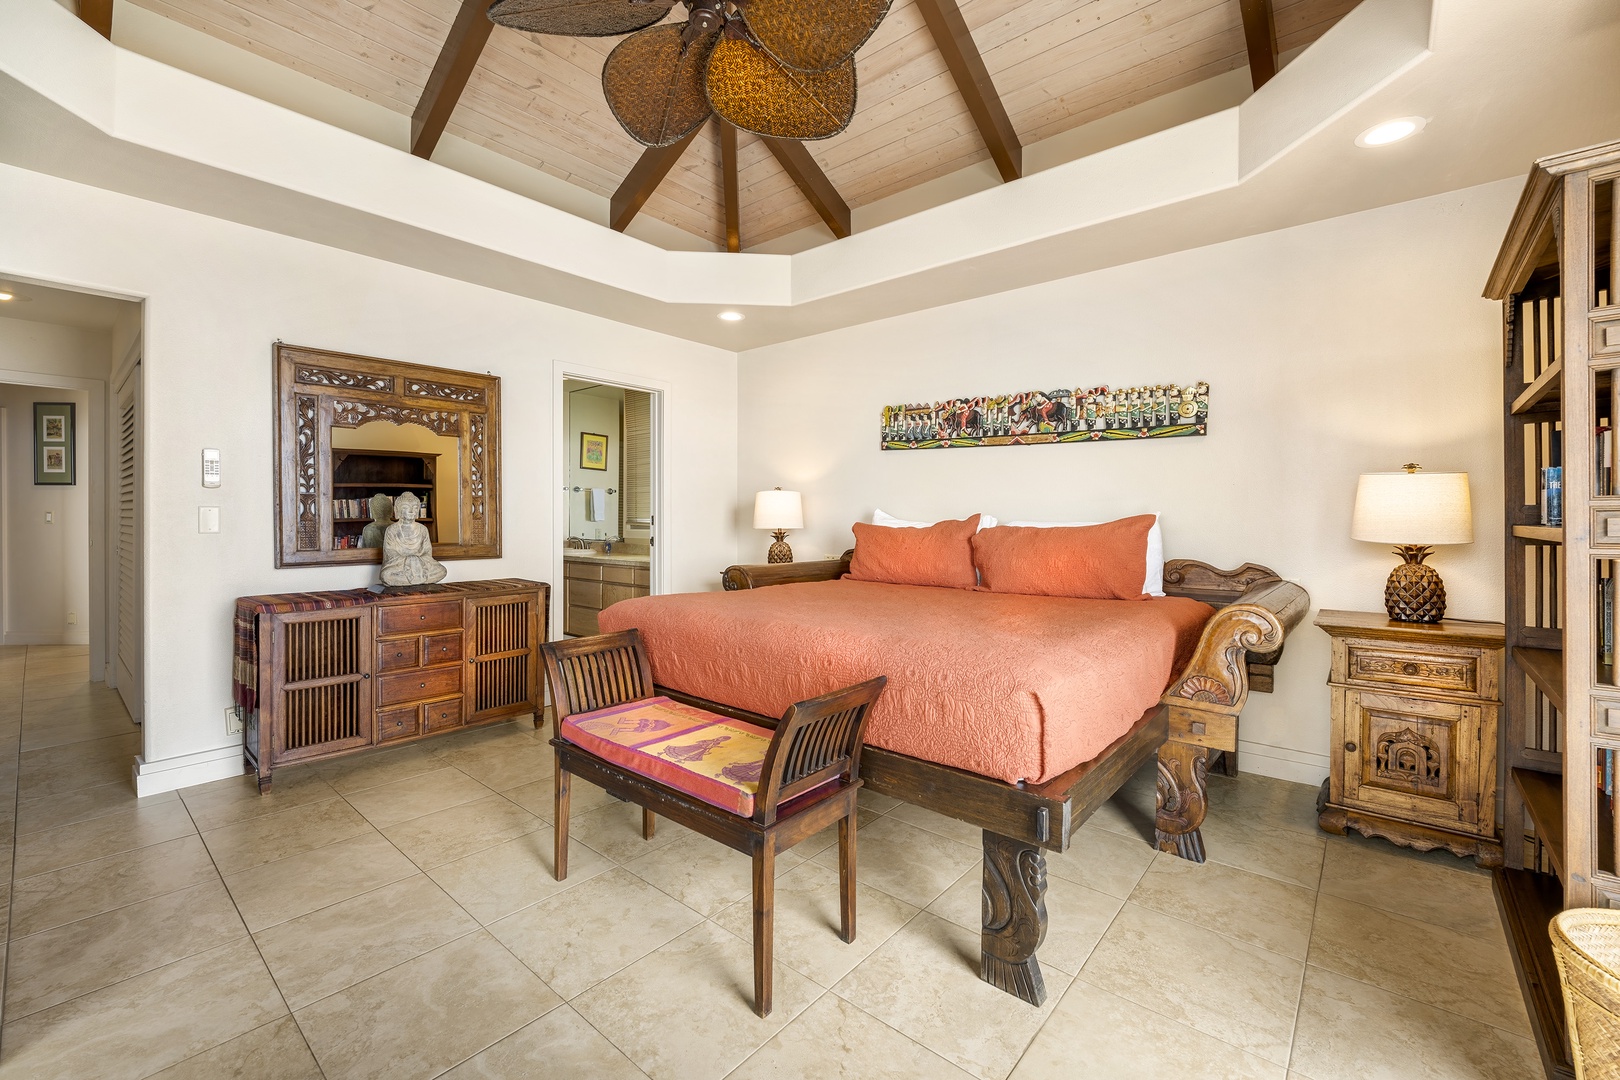 Kailua Kona Vacation Rentals, Ali'i Point #12 - Relax in the A/C or leave the doors open for the ocean breezes!